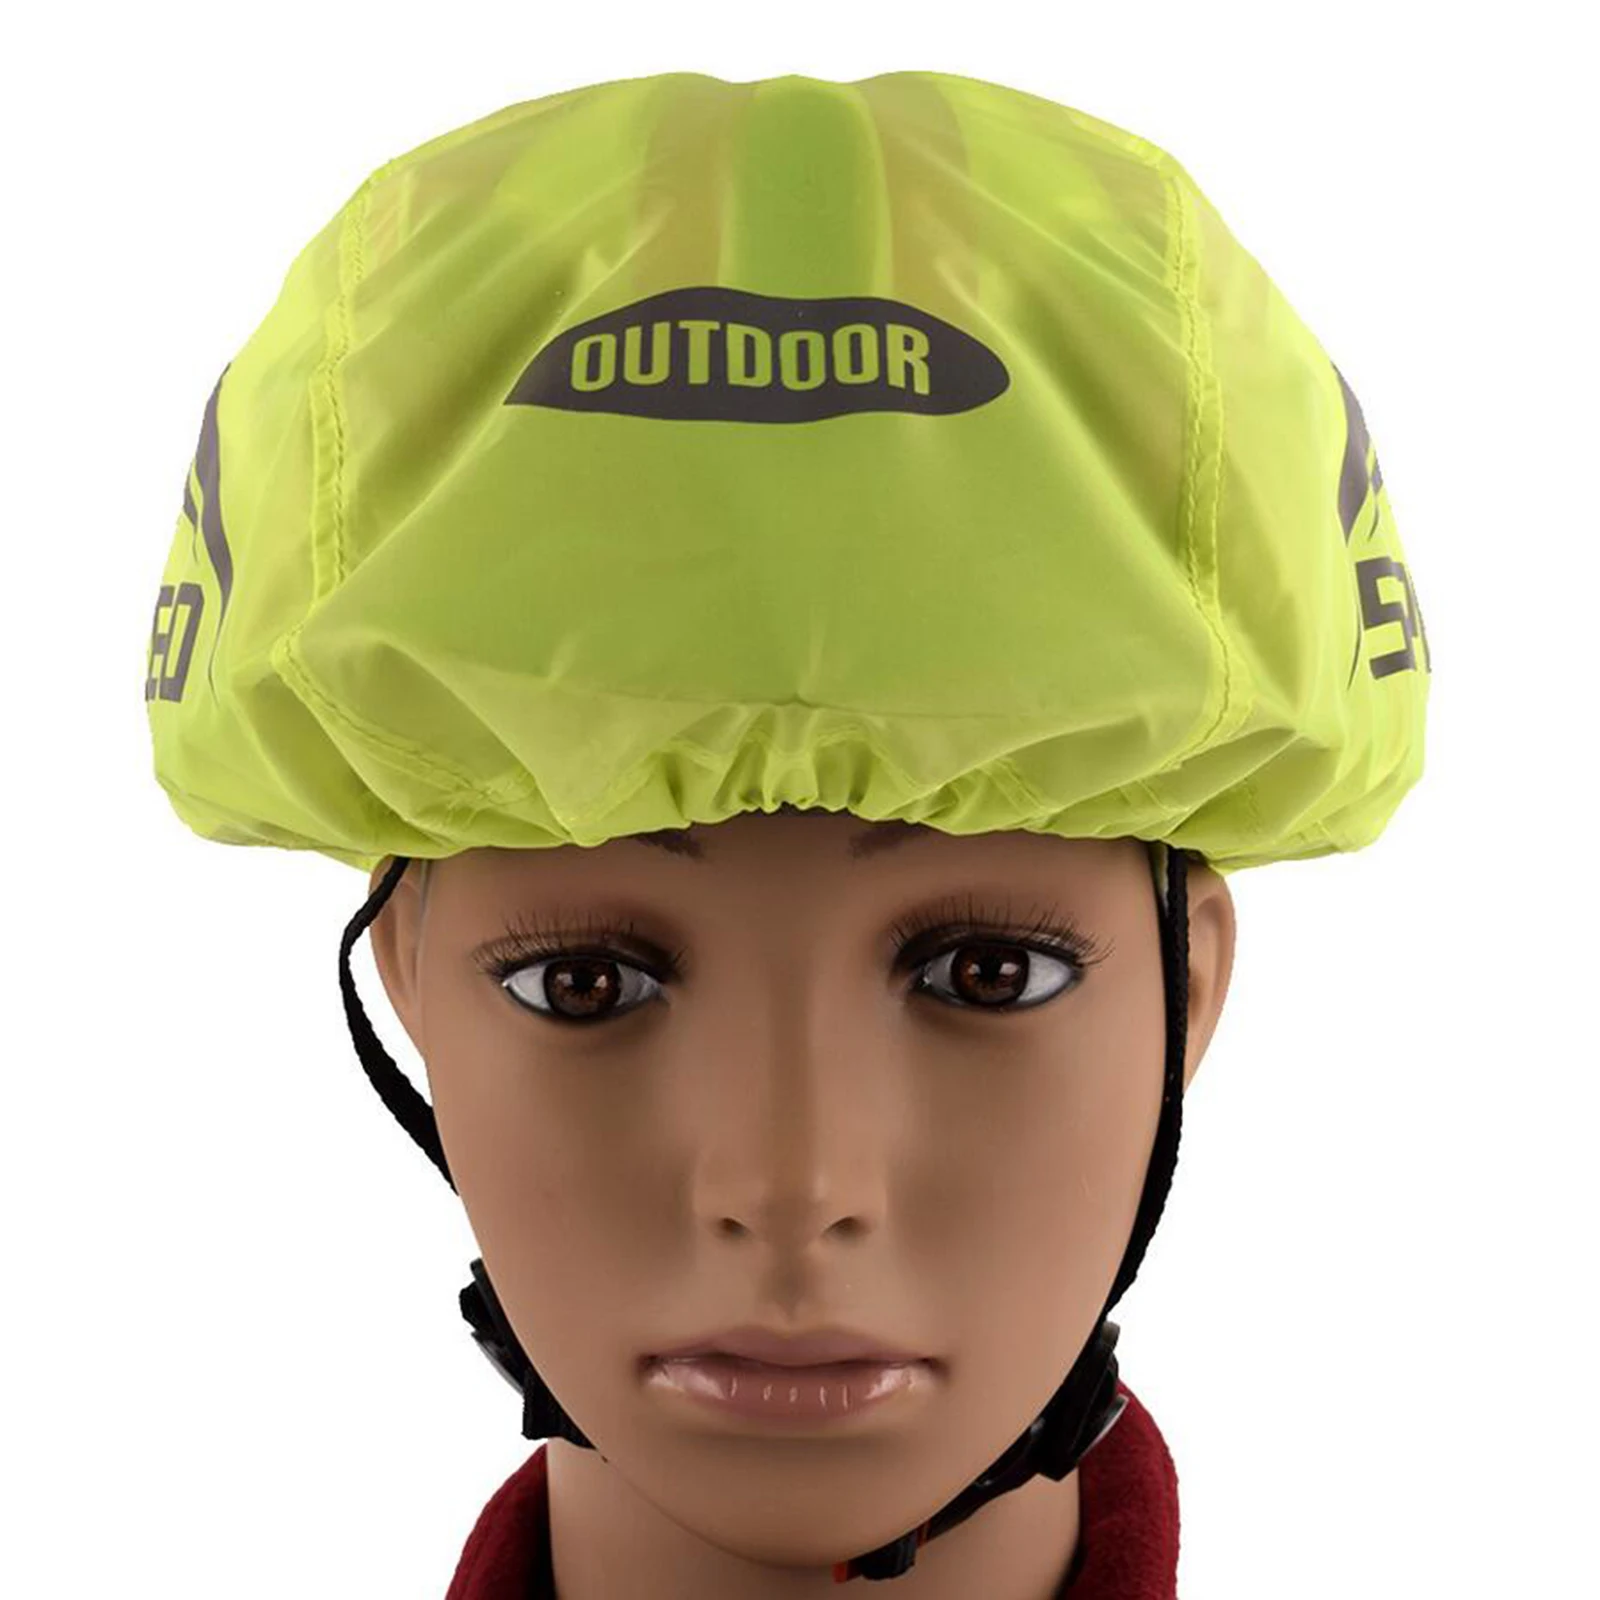 Waterproof Cycling Helmet Cover Reflective Strip Windproof Mountain Road Bicycle Shield Protector Camping Rider Outdoor Cycling